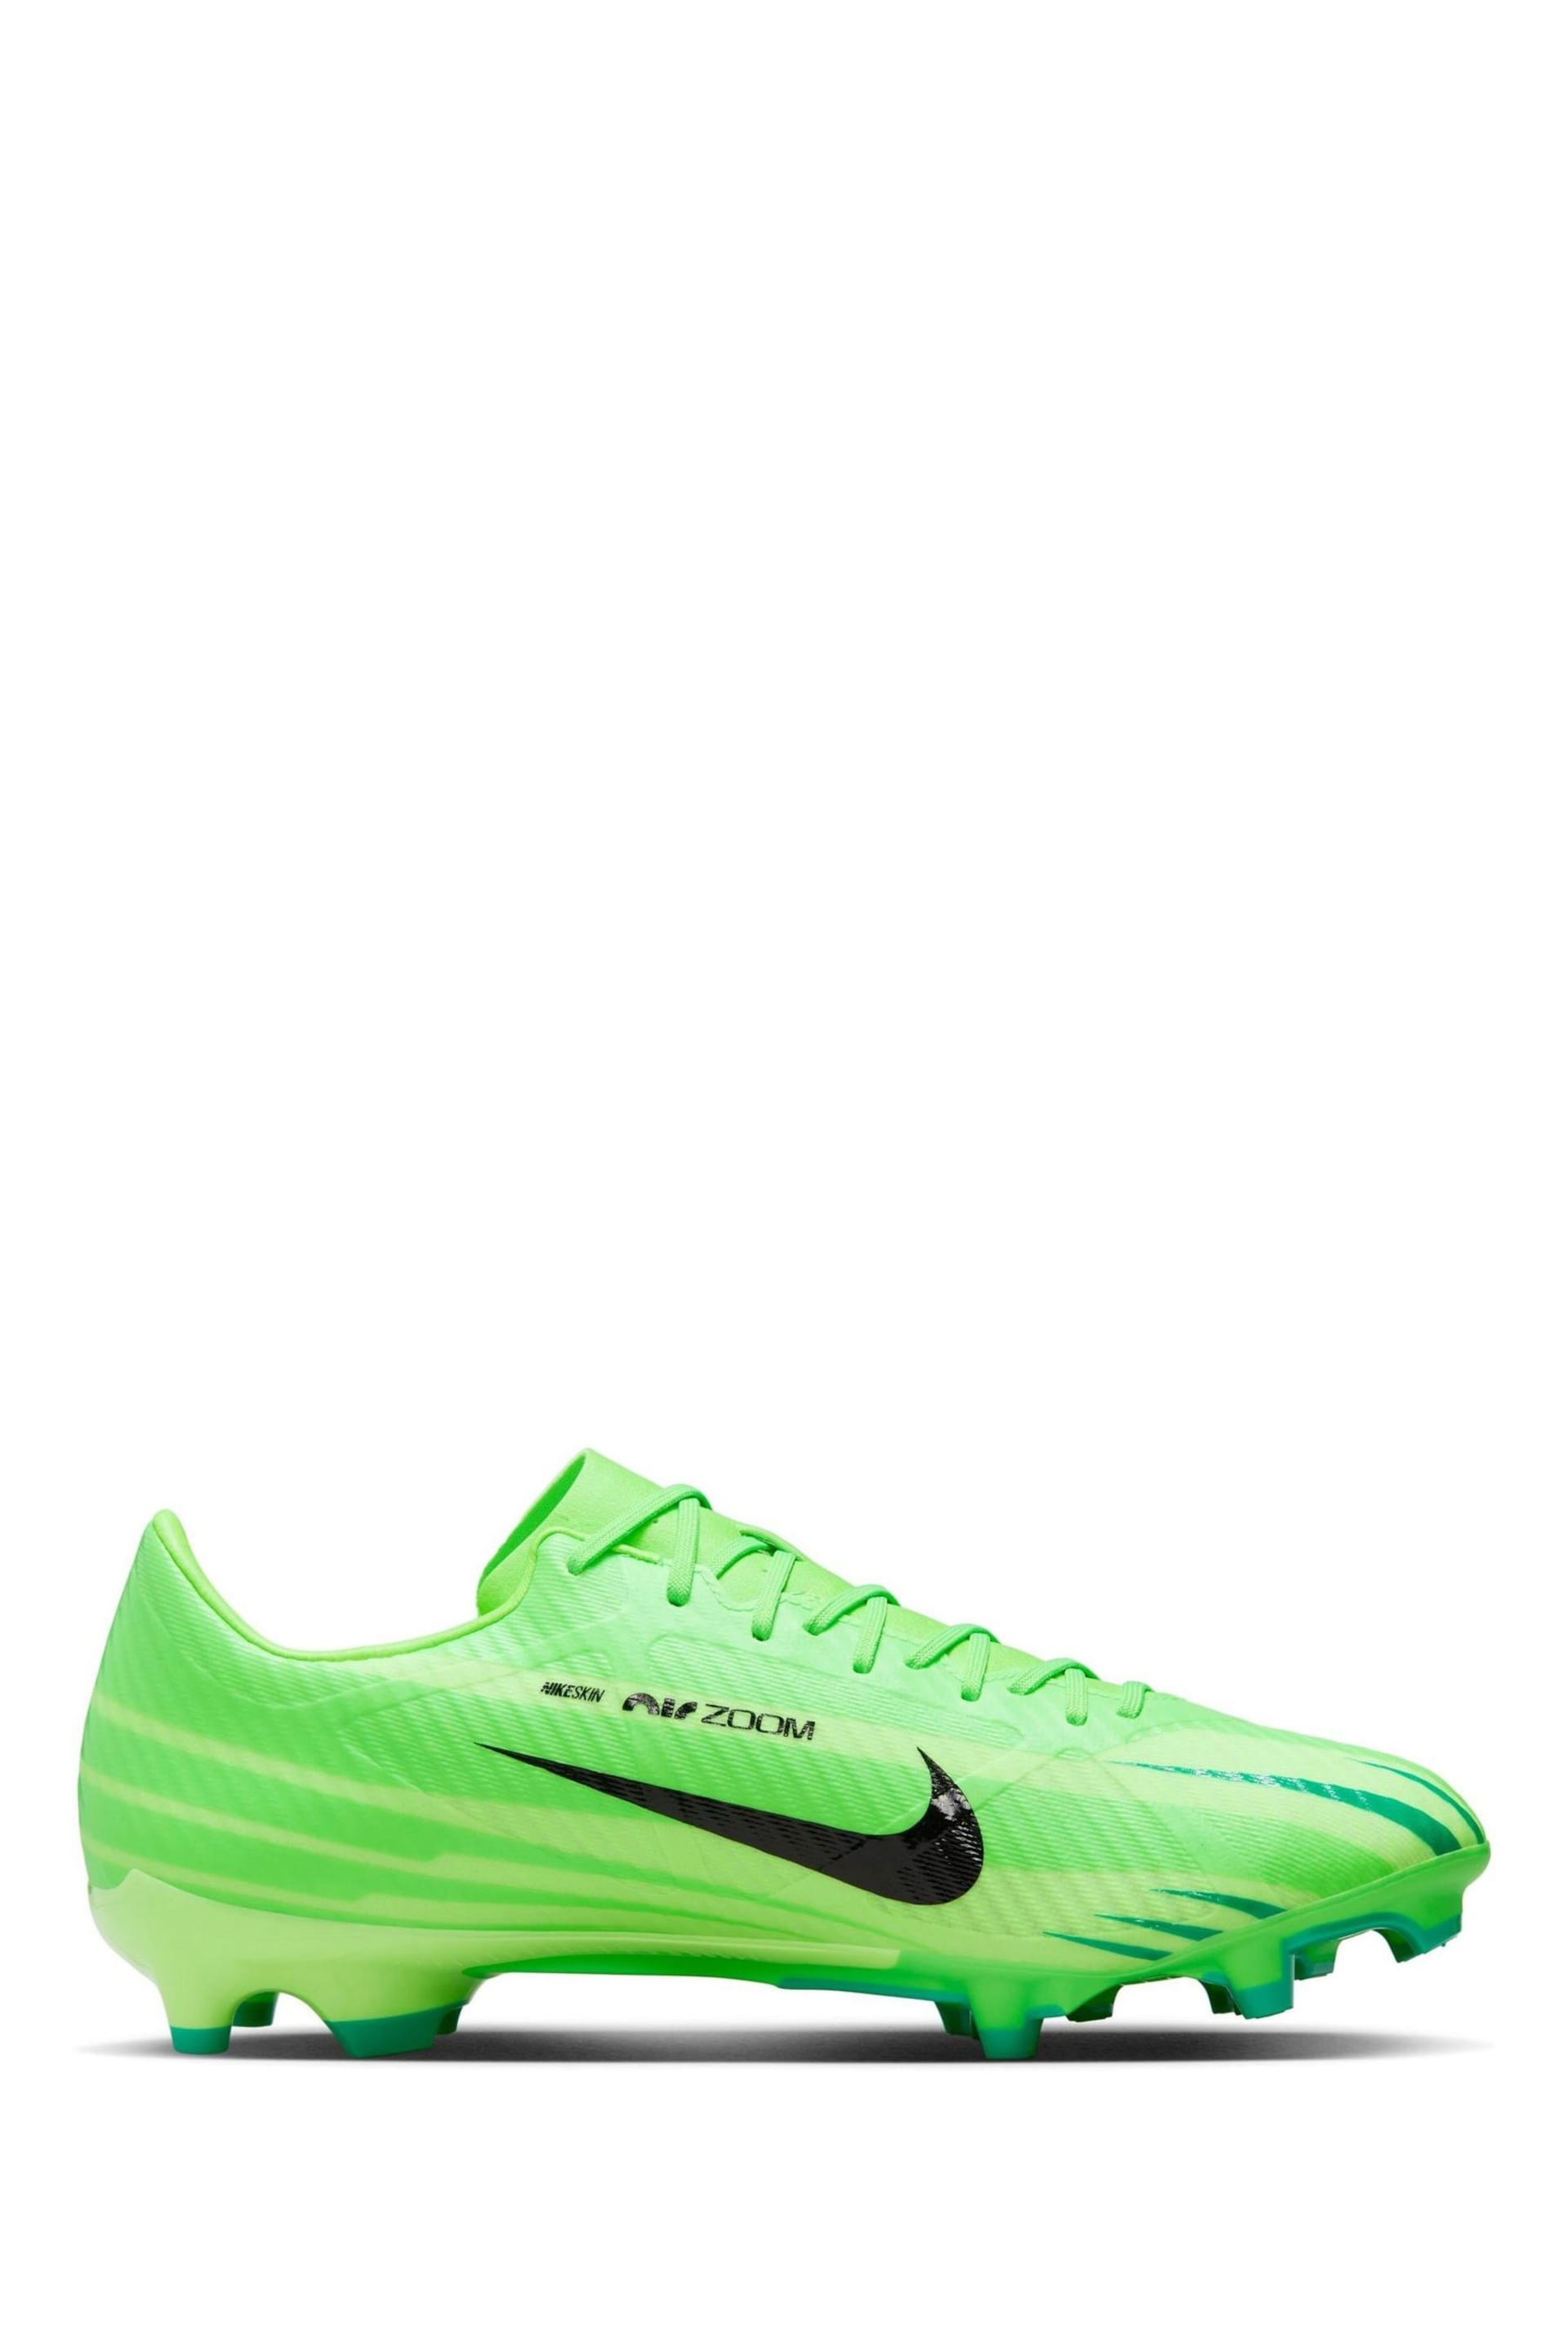 Nike Barely Green/Gold Zoom Vapor 15 Academy Multi Ground Football Boots - Image 3 of 11